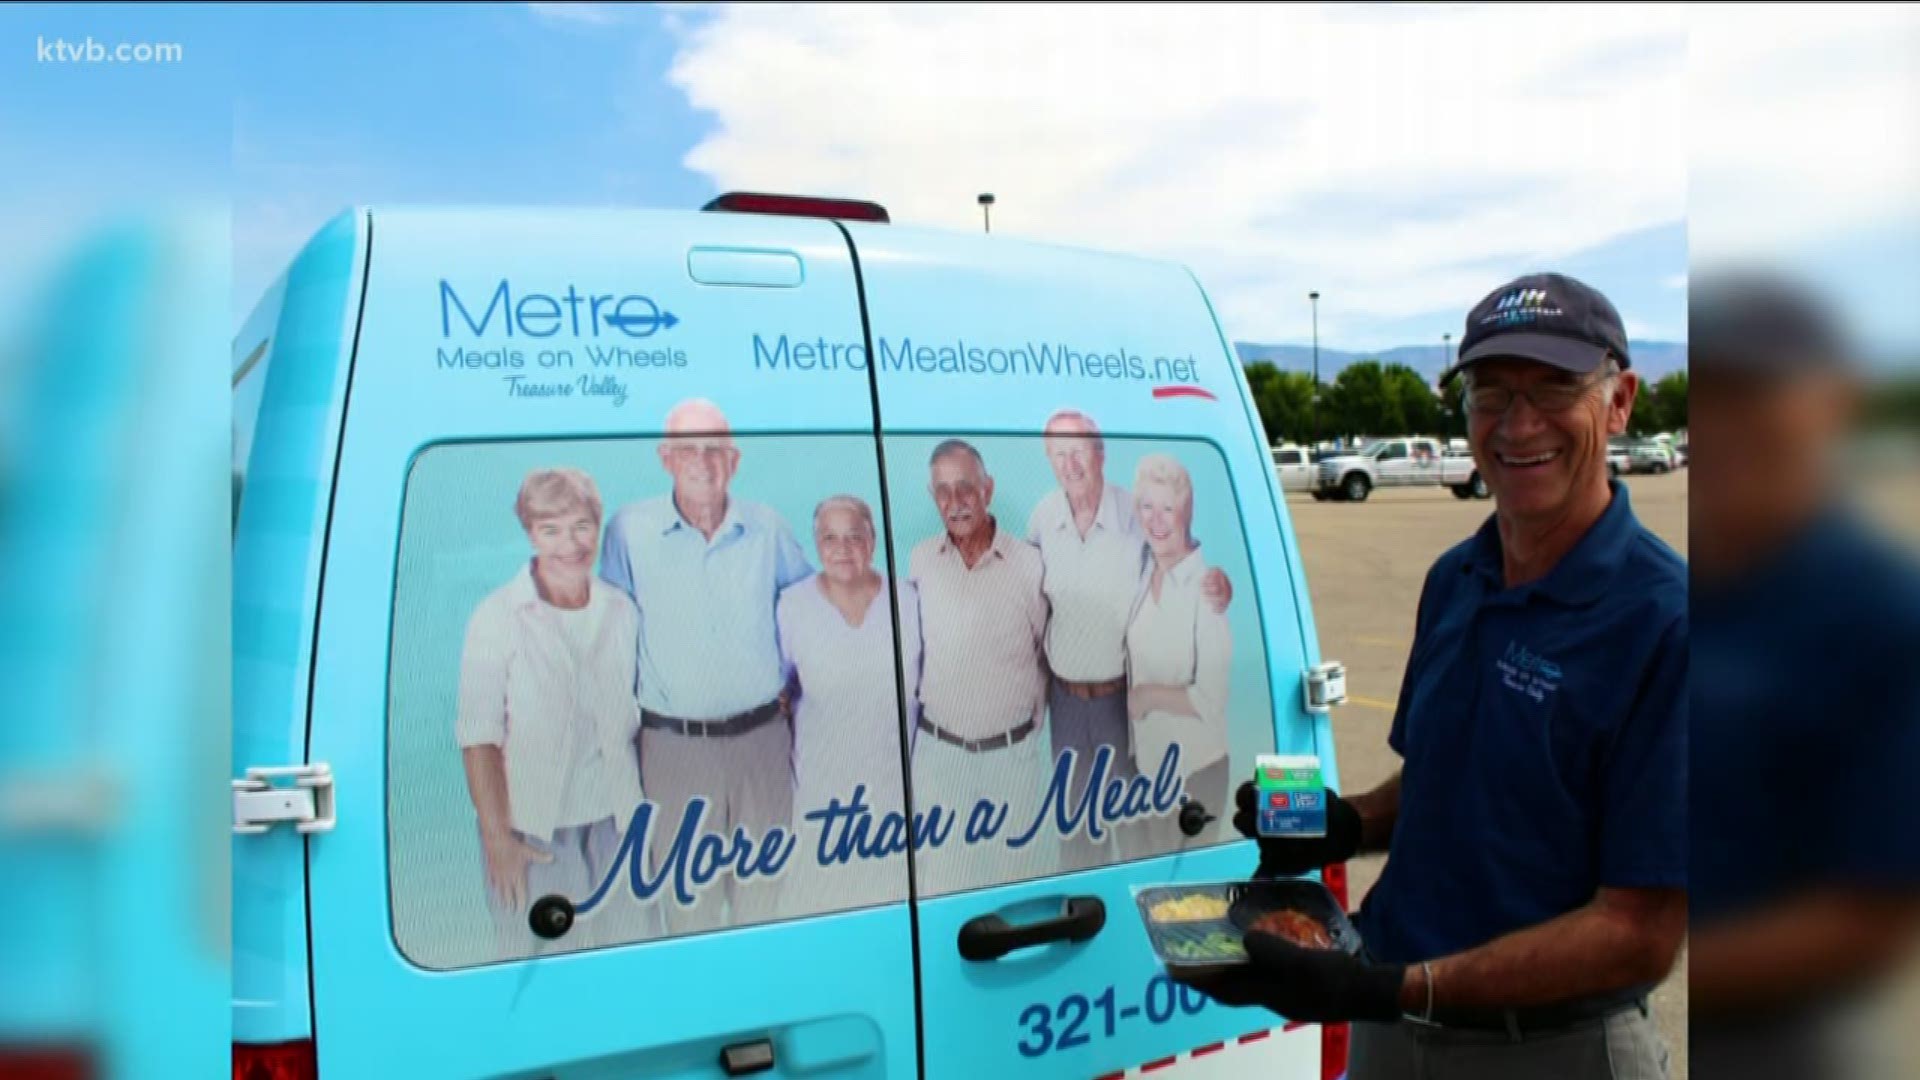 Today's featured non-profit is Metro Meals on Wheels of the Treasure Valley